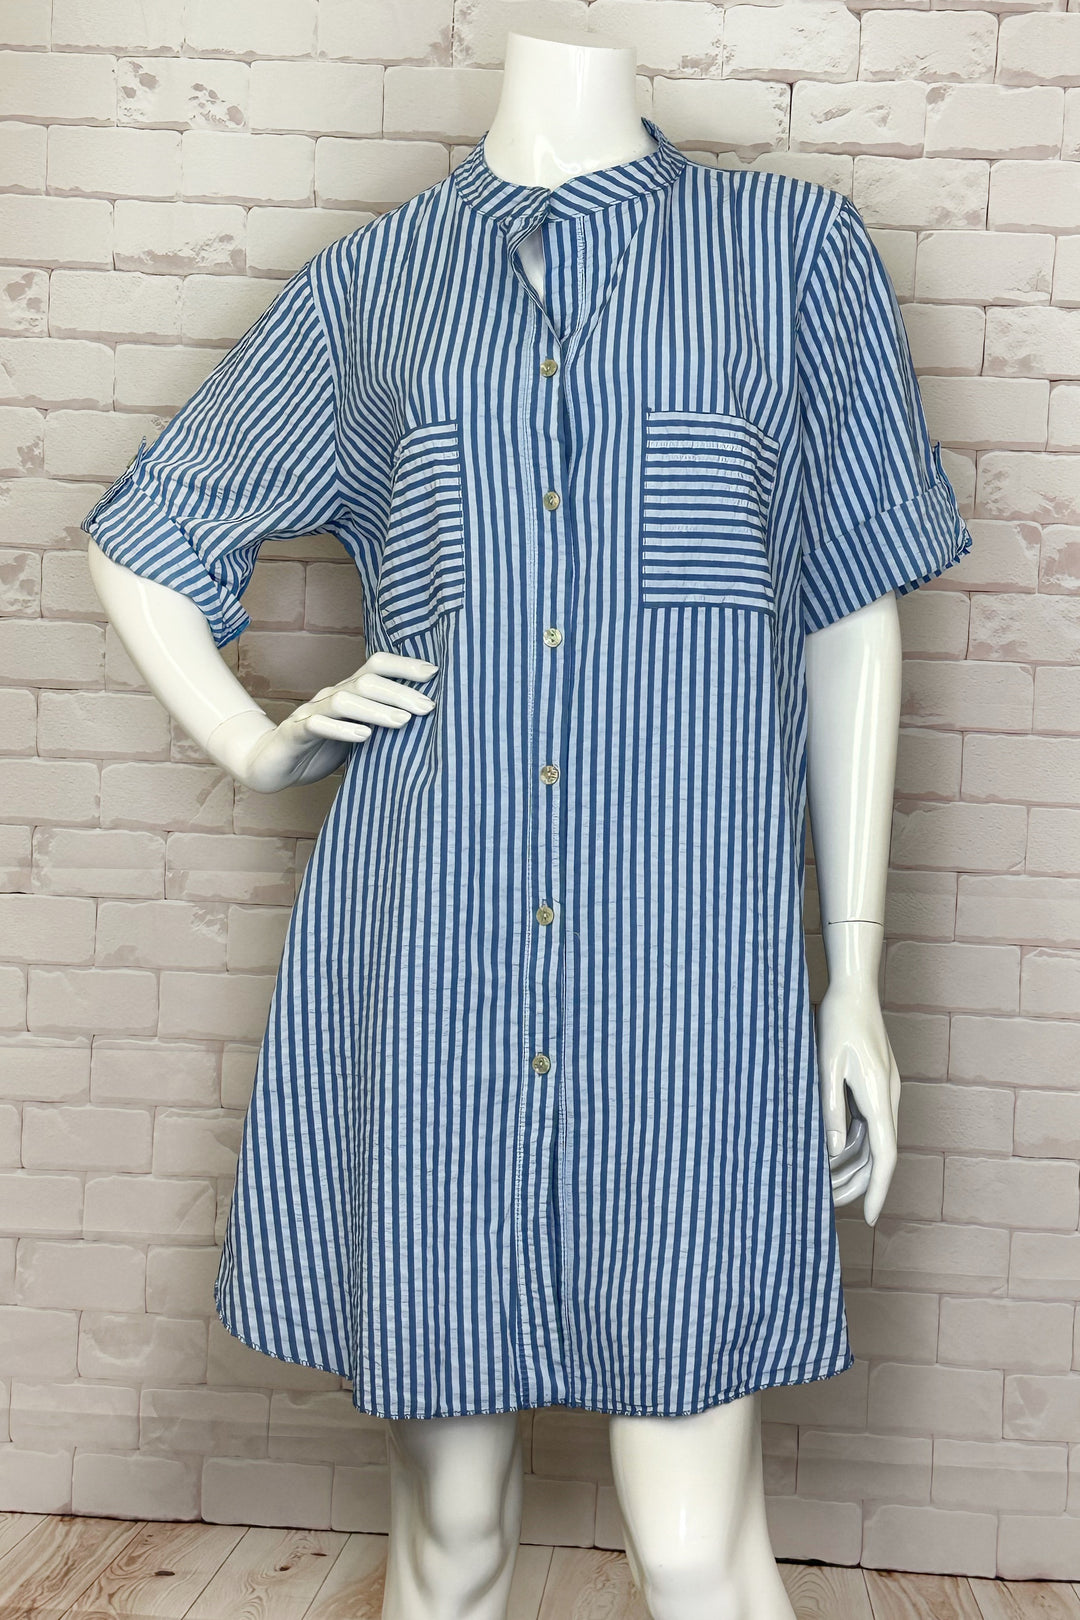 CHERISHH Spring 2024 Made of all cotton, it will keep you cool during warm months. With a light and airy feel, front button closure and relaxed fit, this dress will become your go-to casual house dress!